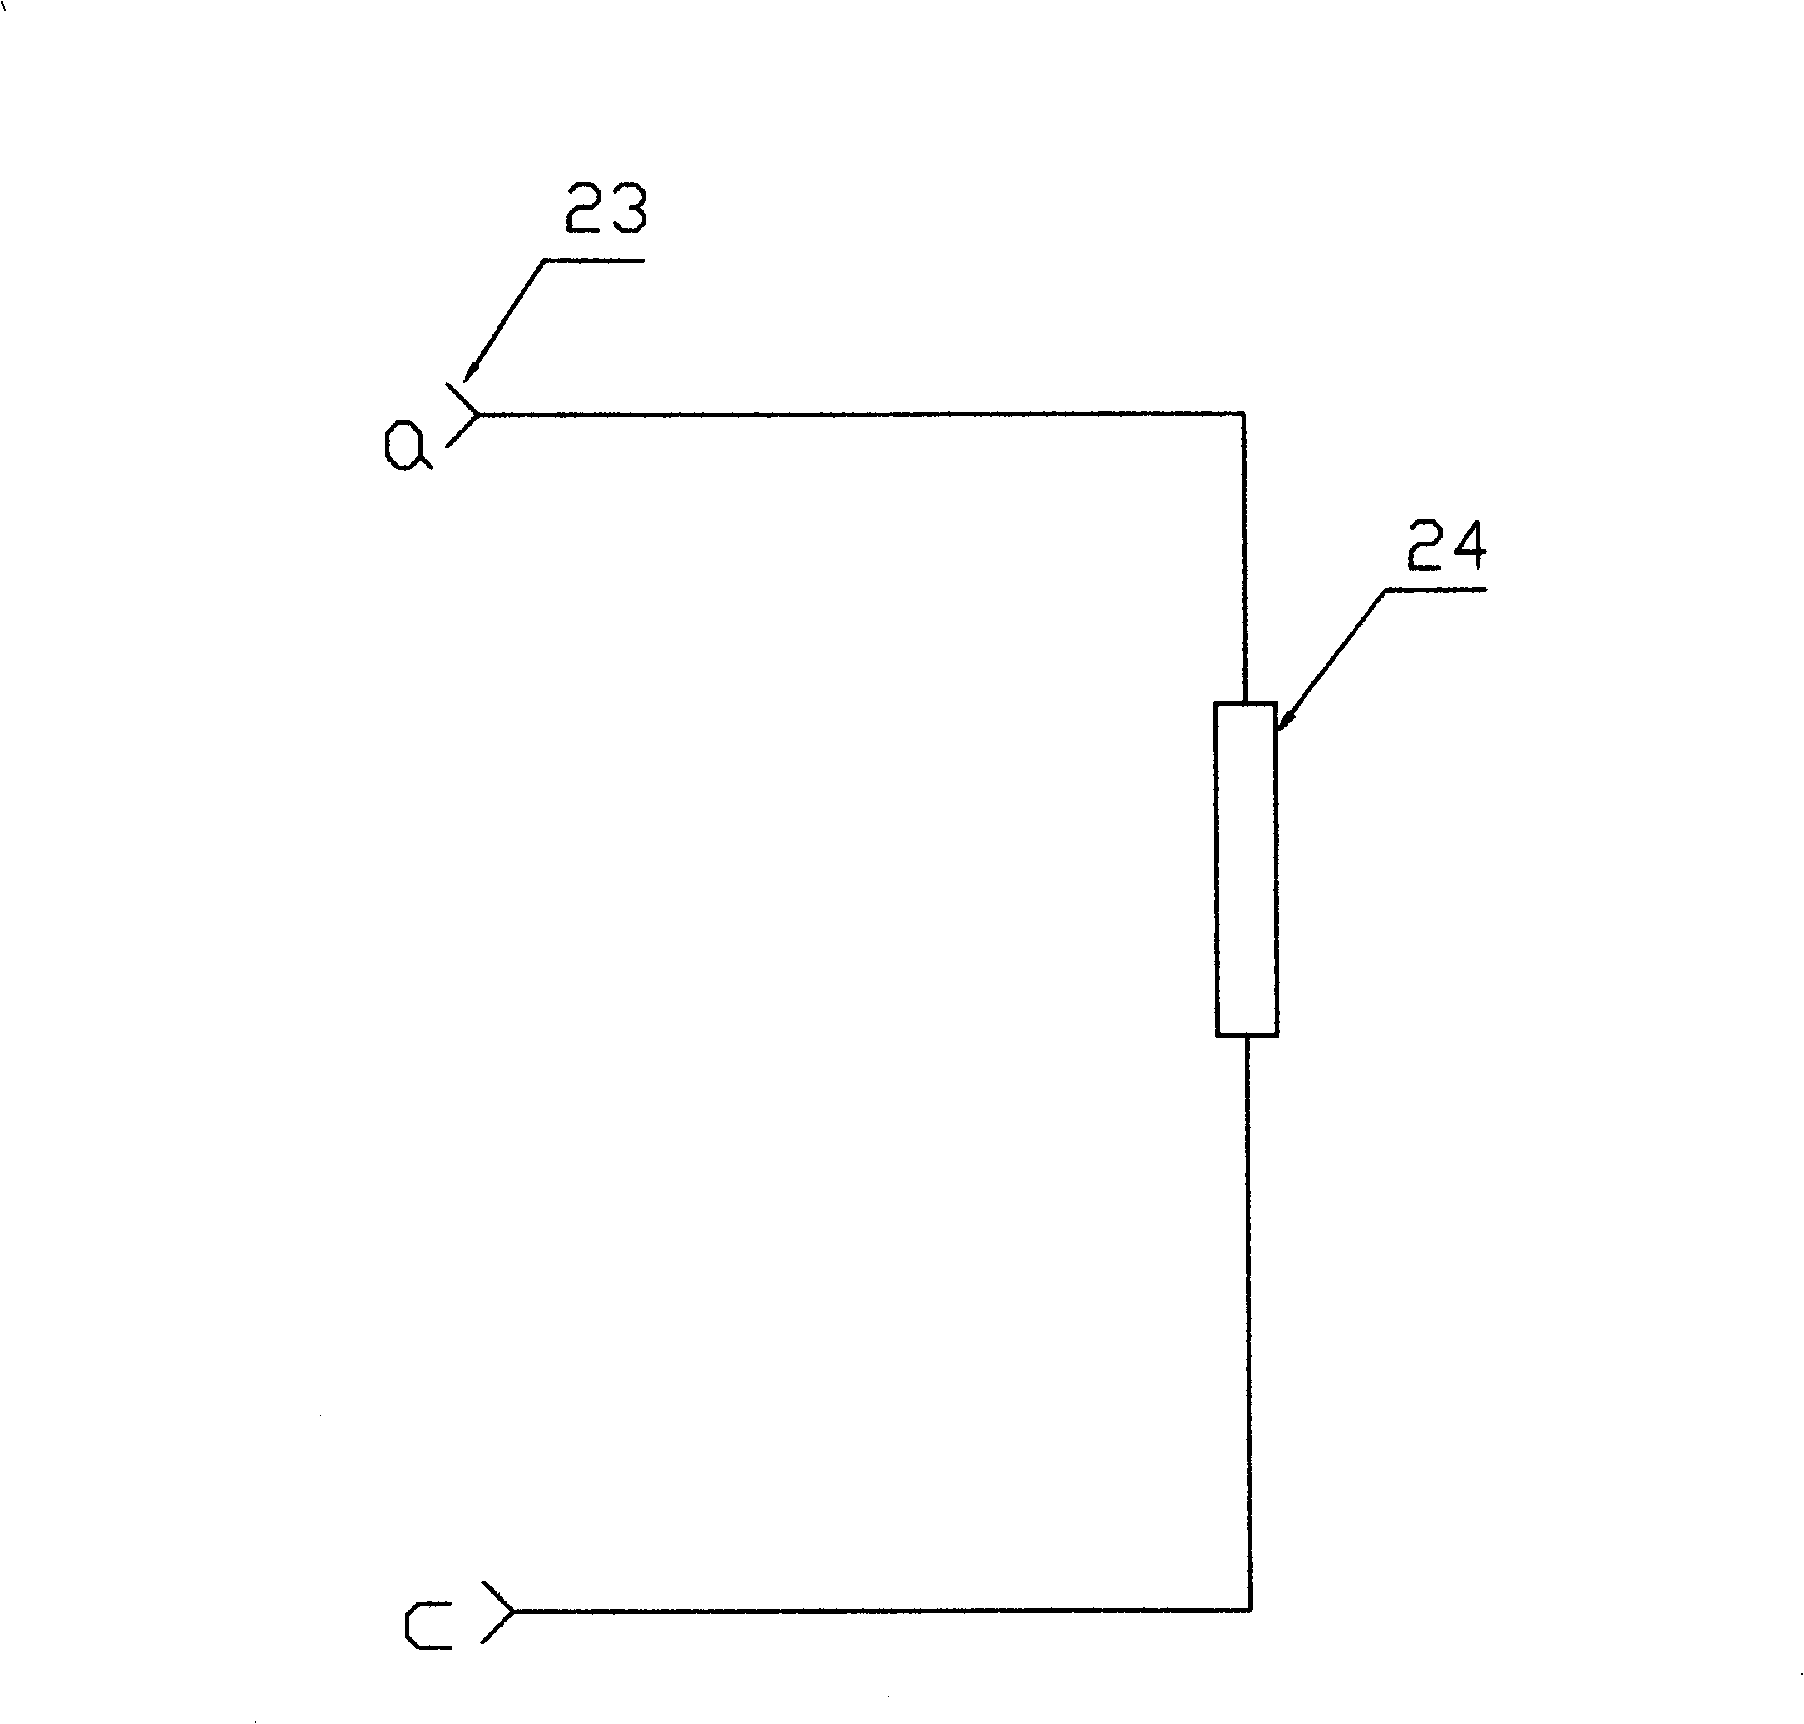 Circuit for controlling series battery charge and discharge